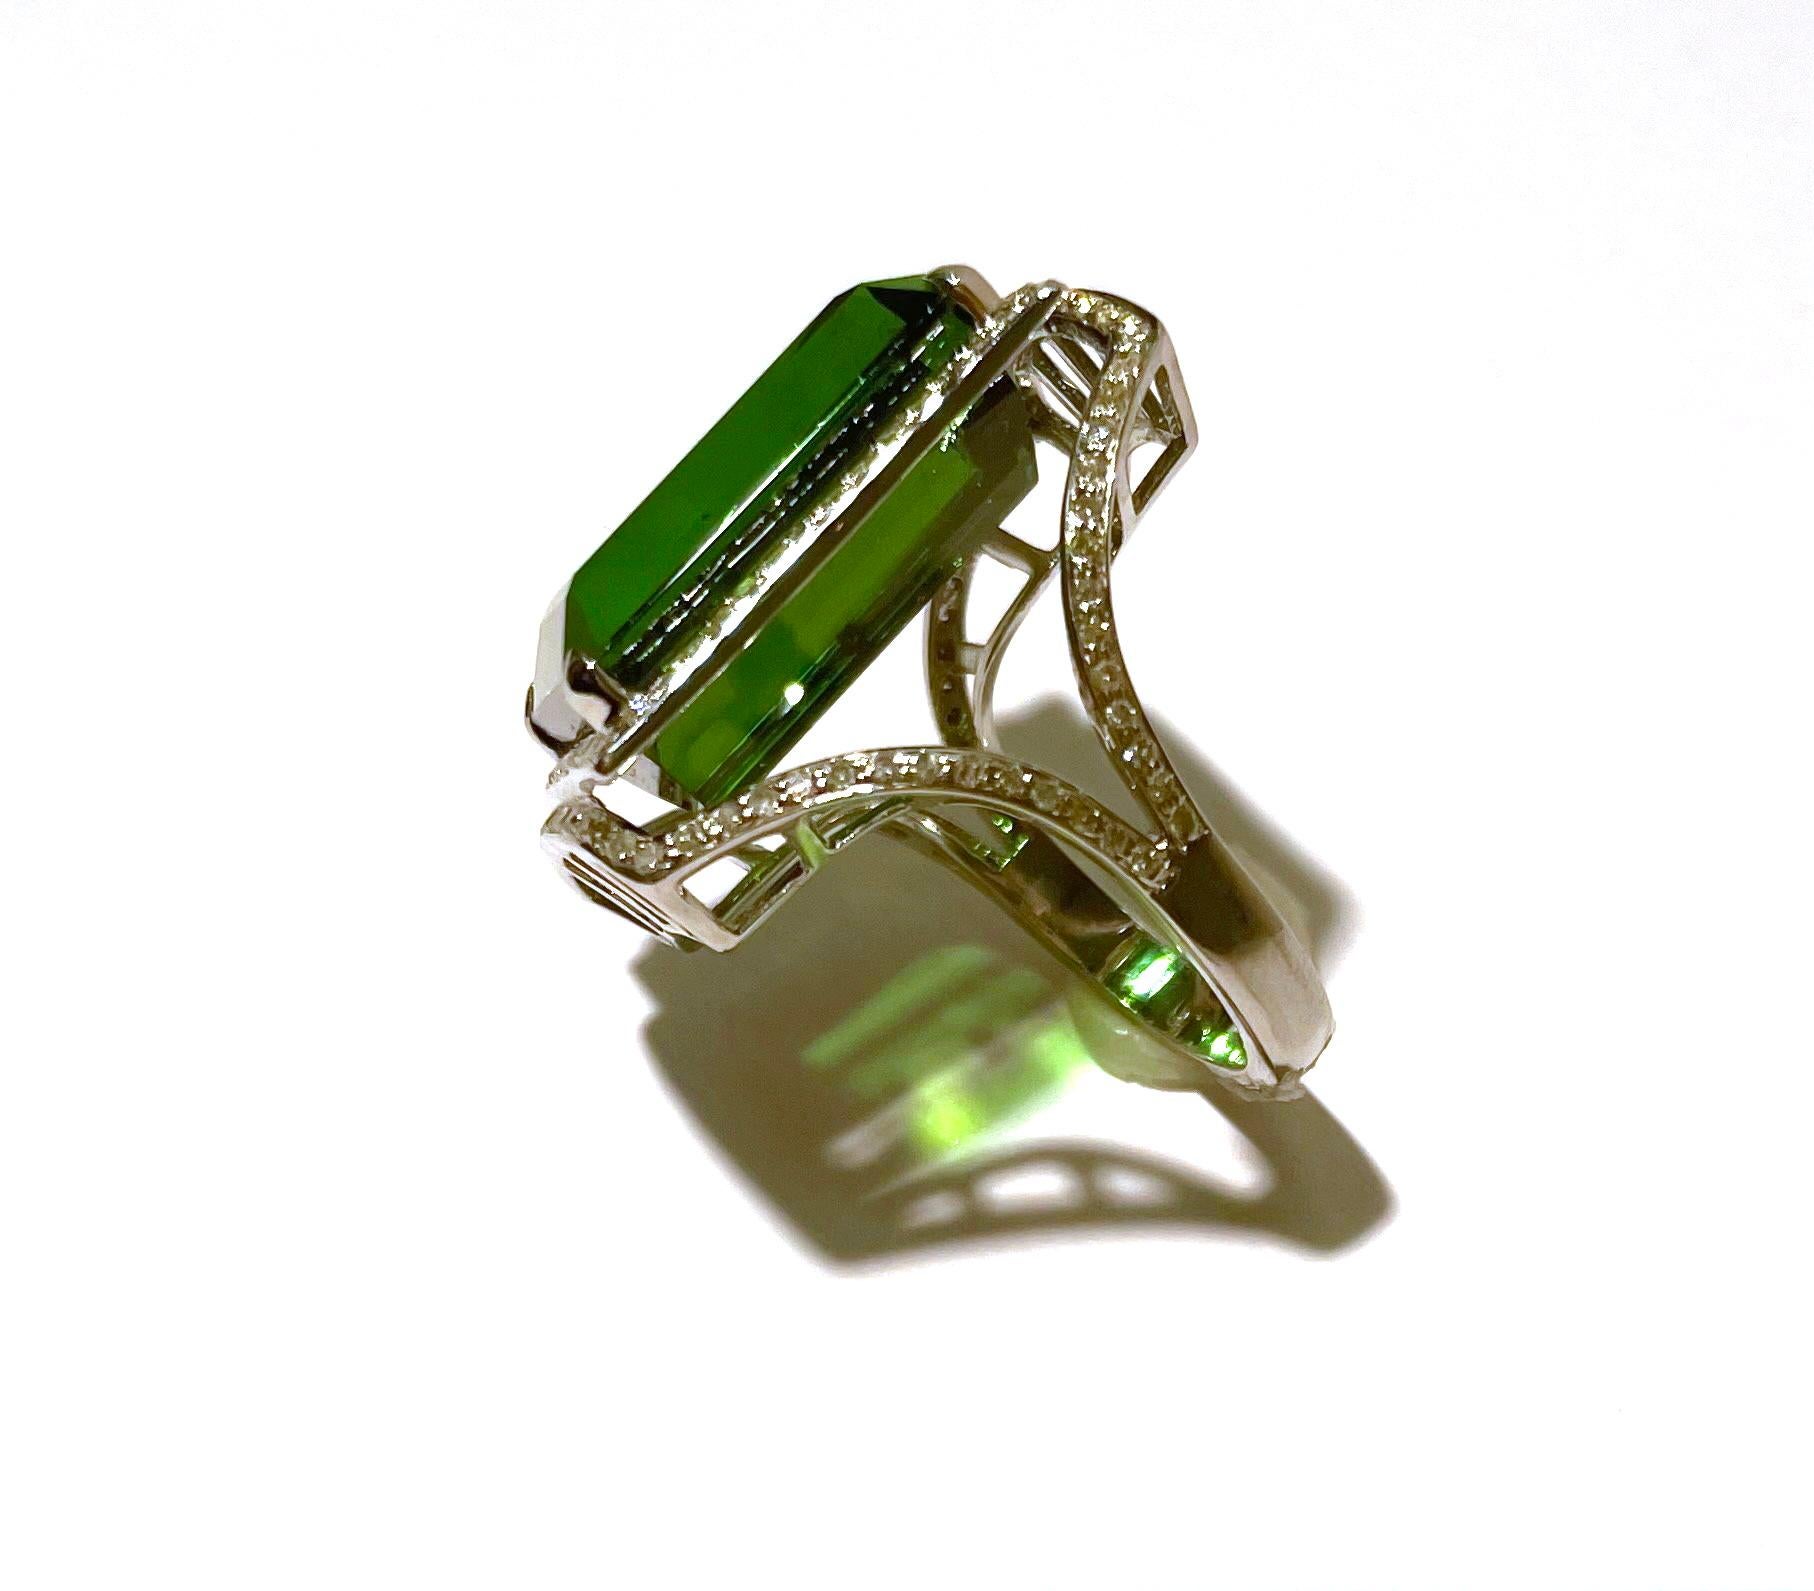 Description
Large, clear emerald cut Green Tourmaline in a unique setting with pave diamonds and 14k white gold.
Item # R178

Materials and Weight
Green tourmaline 19x15x9mm, 25.27cts, emerald cut
Diamonds 0.94cts.
14k white gold

Dimensions
Size